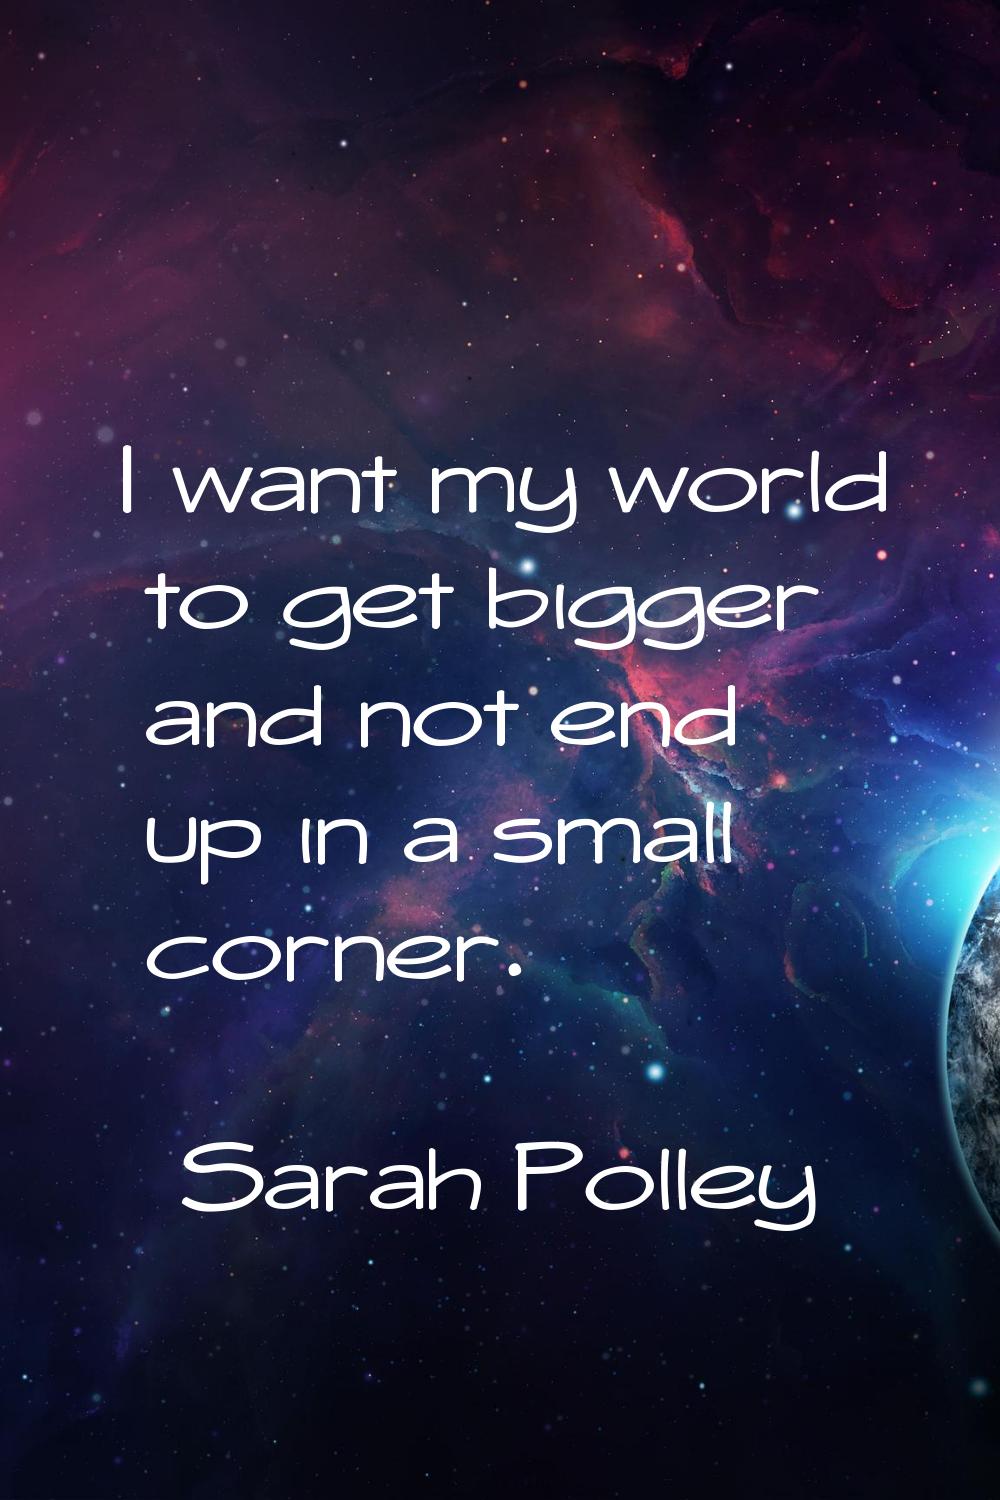 I want my world to get bigger and not end up in a small corner.